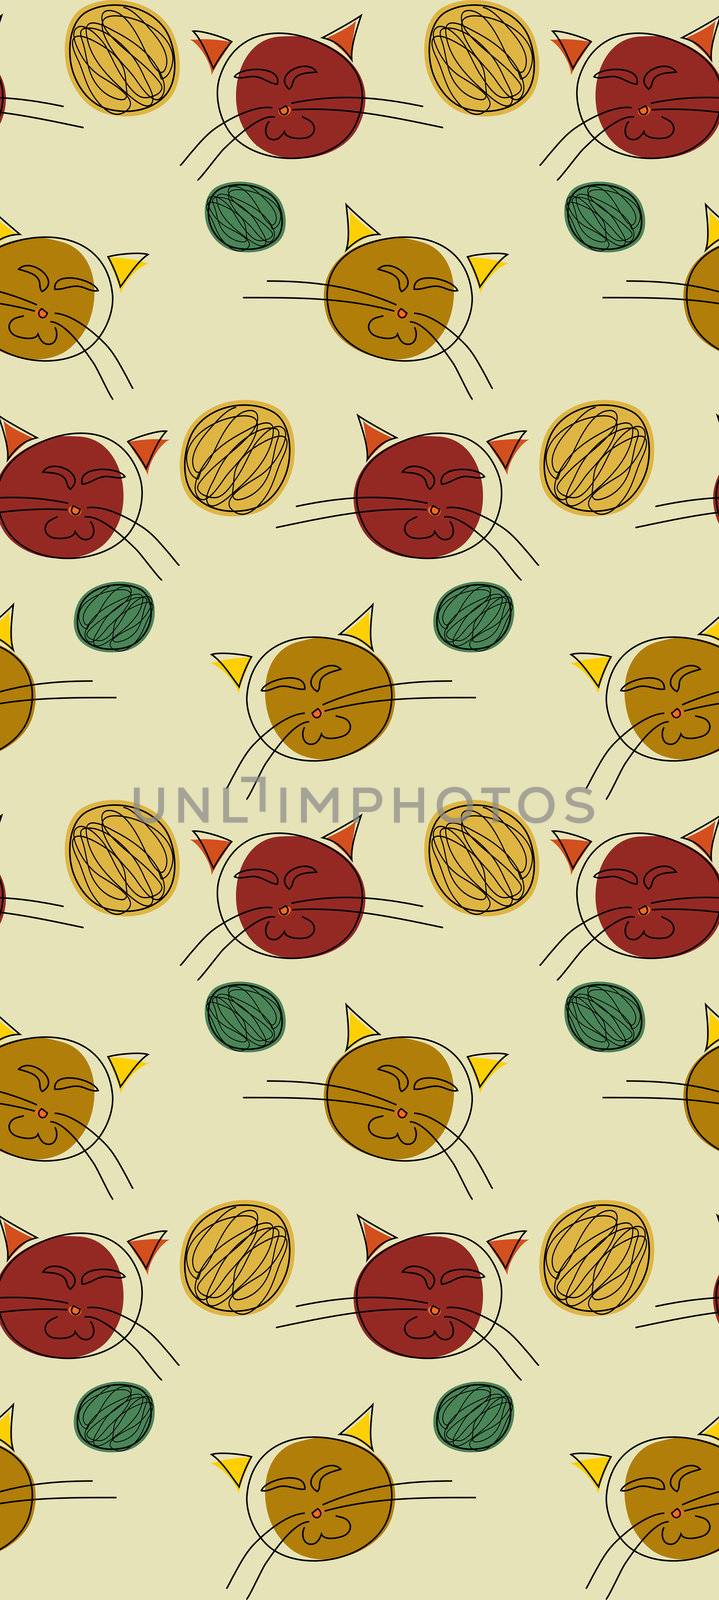 Seamless background of cute cats and balls of yarn